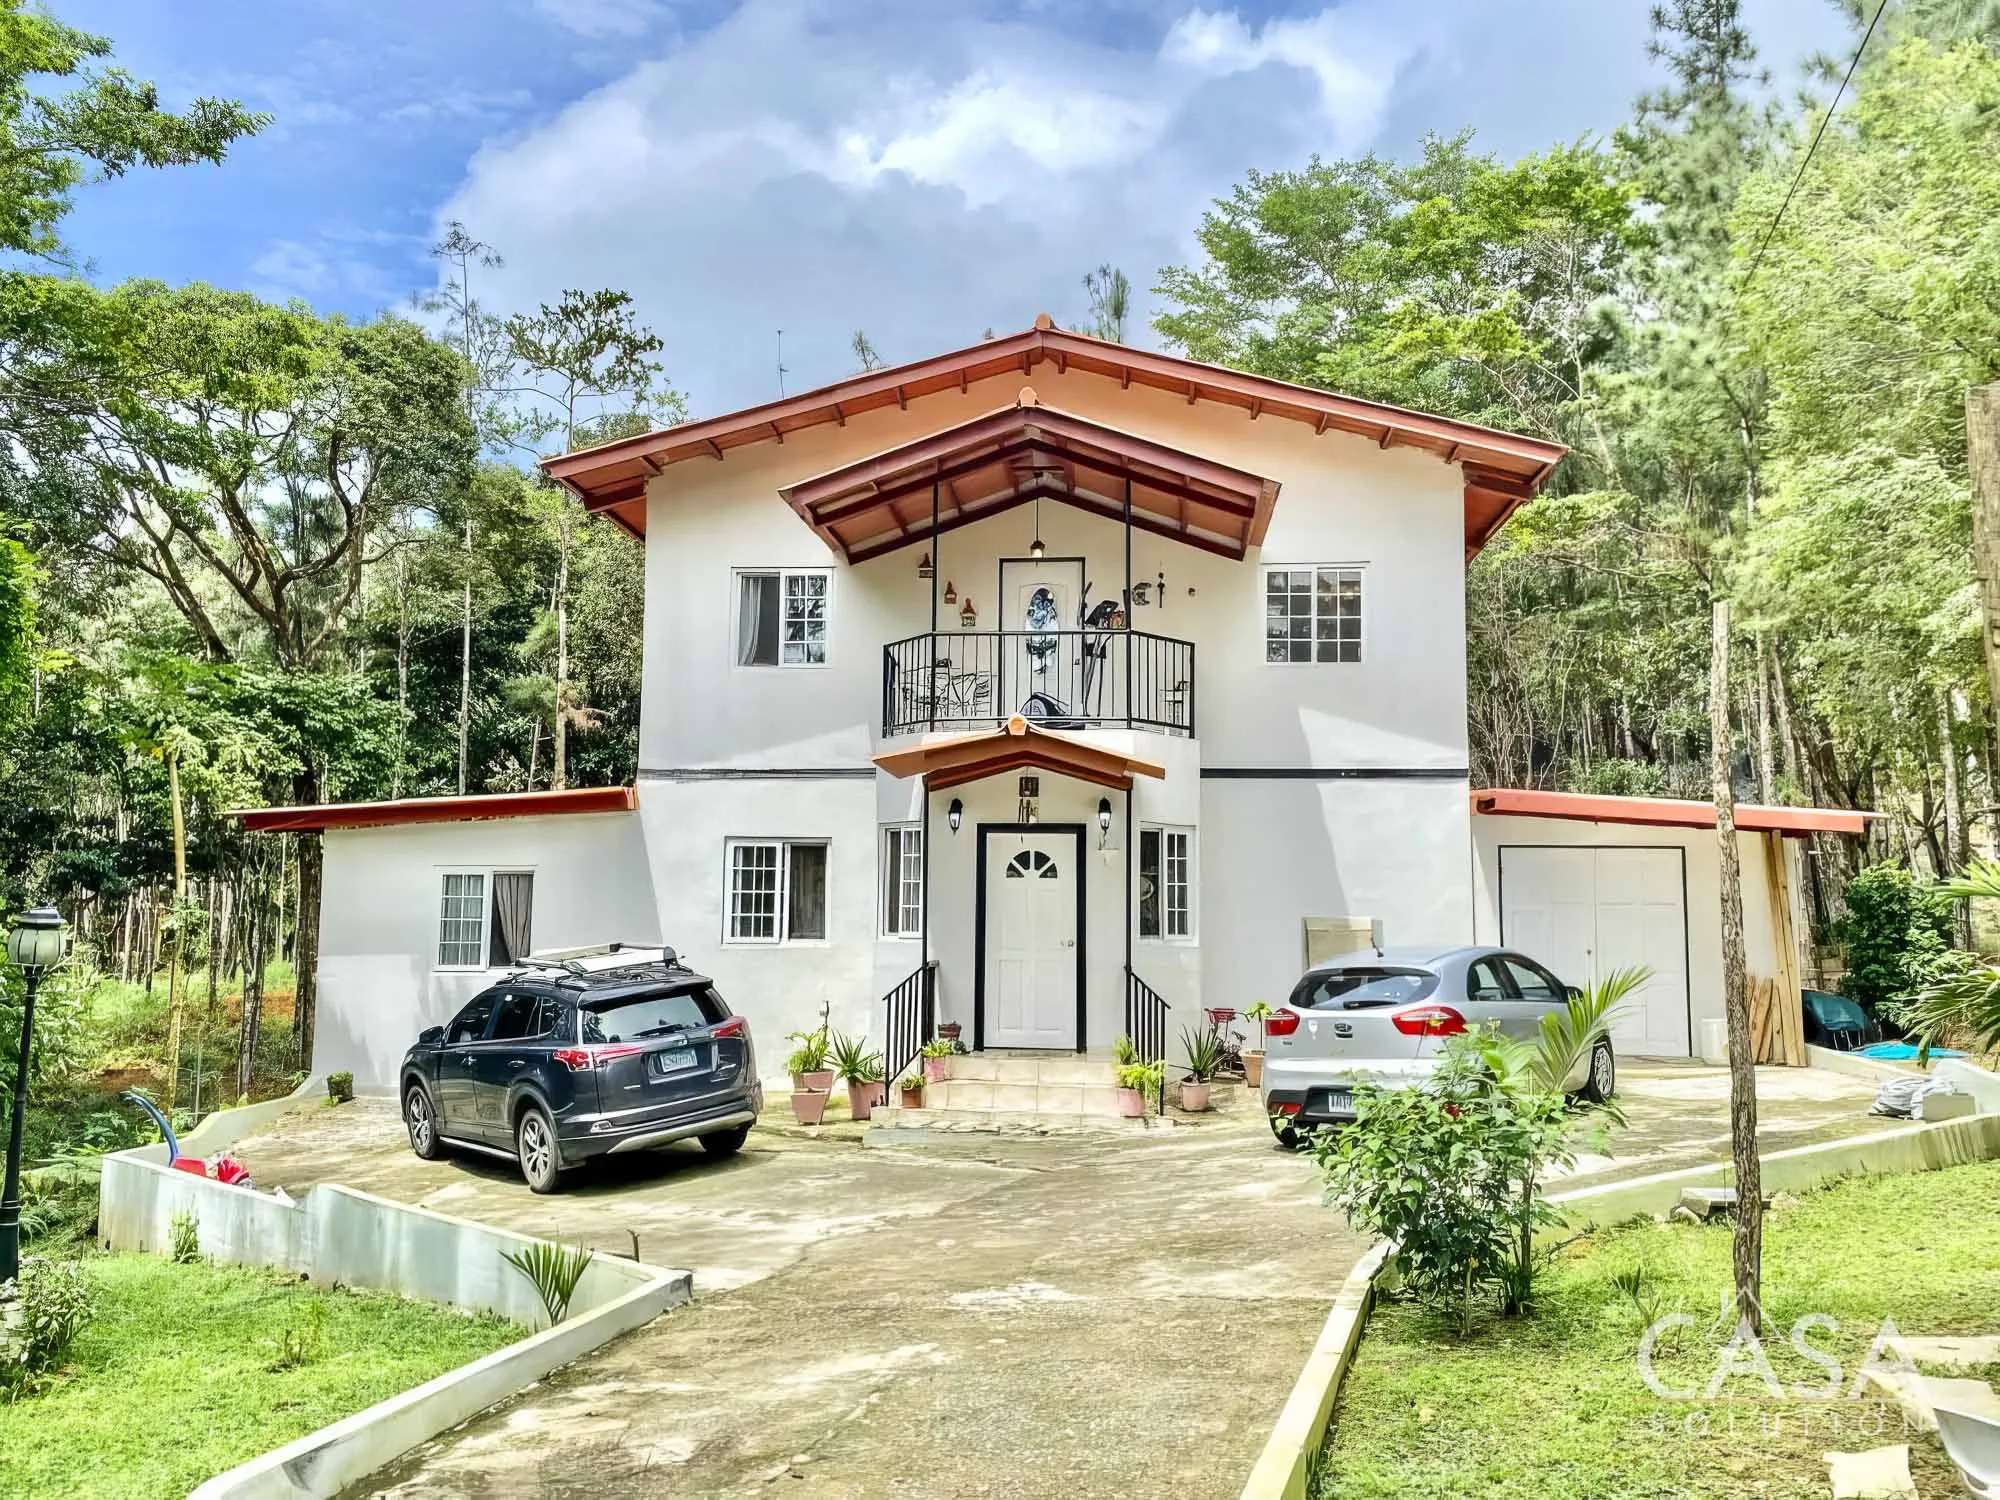 4-bedroom mountain home in Altos de Cerro Azul with Mountain views, a stream, and a tranquil setting. Great for families or a weekend retreat.